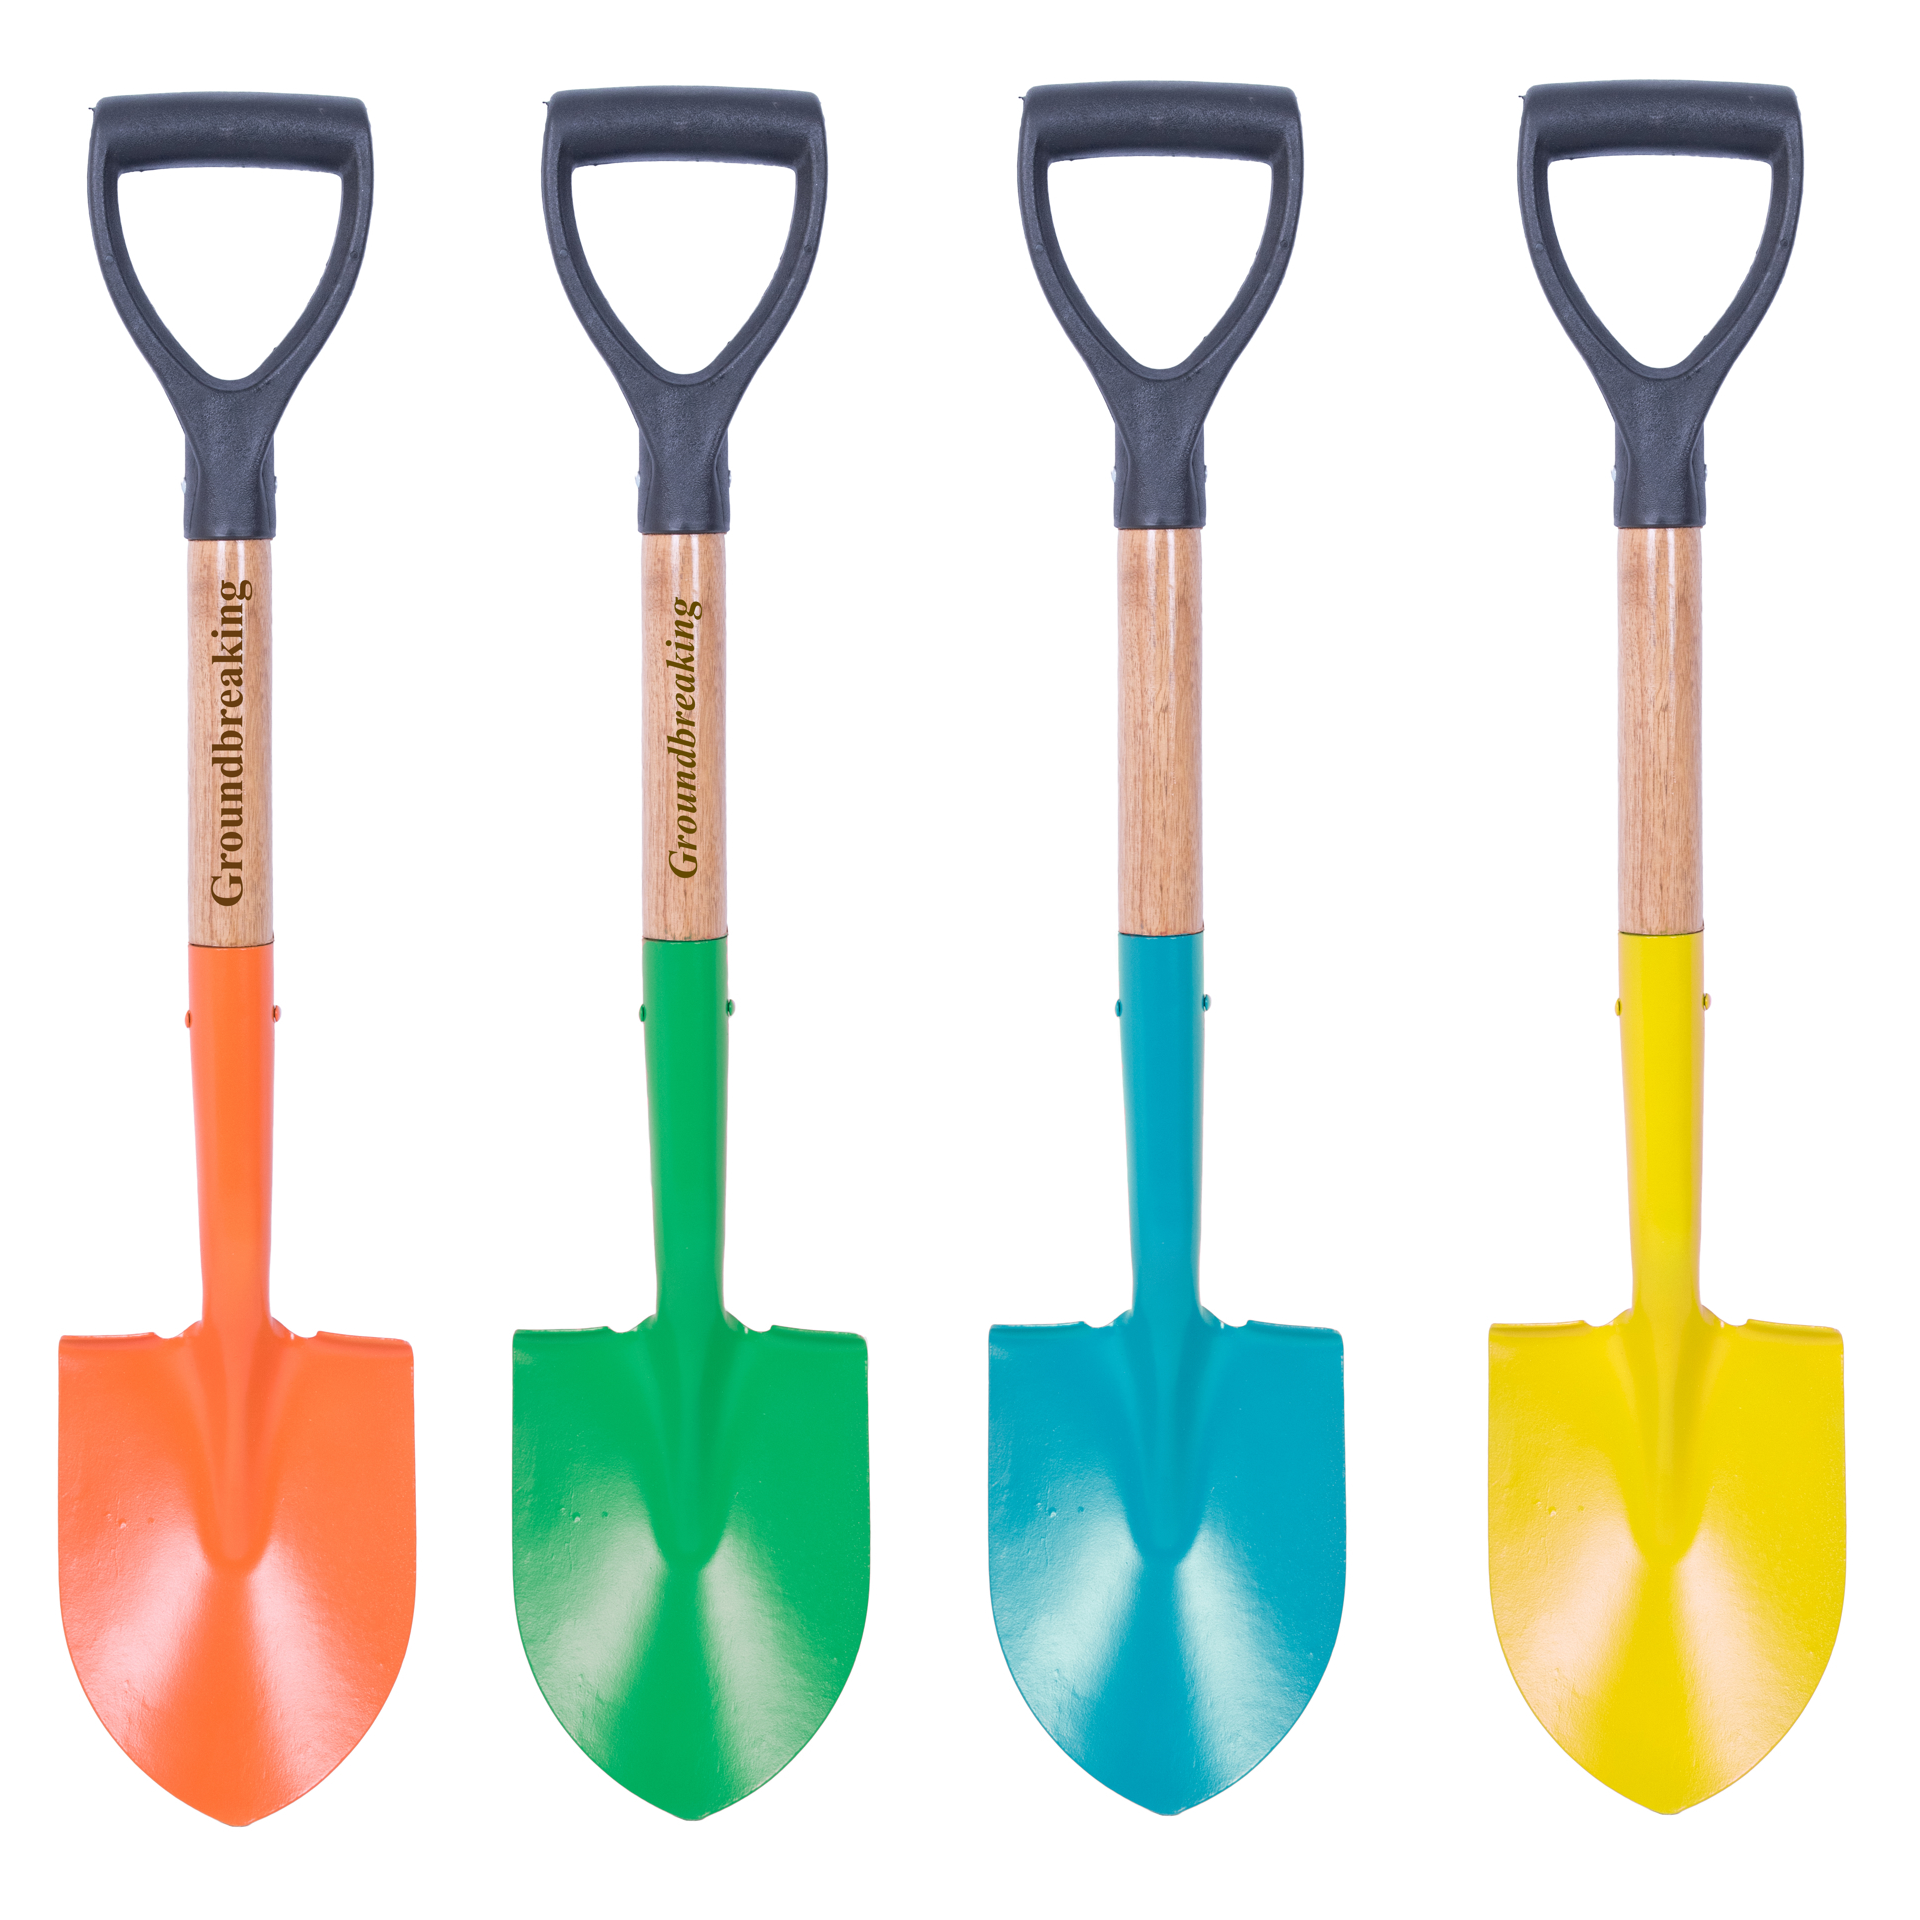 26" shovels in various colors